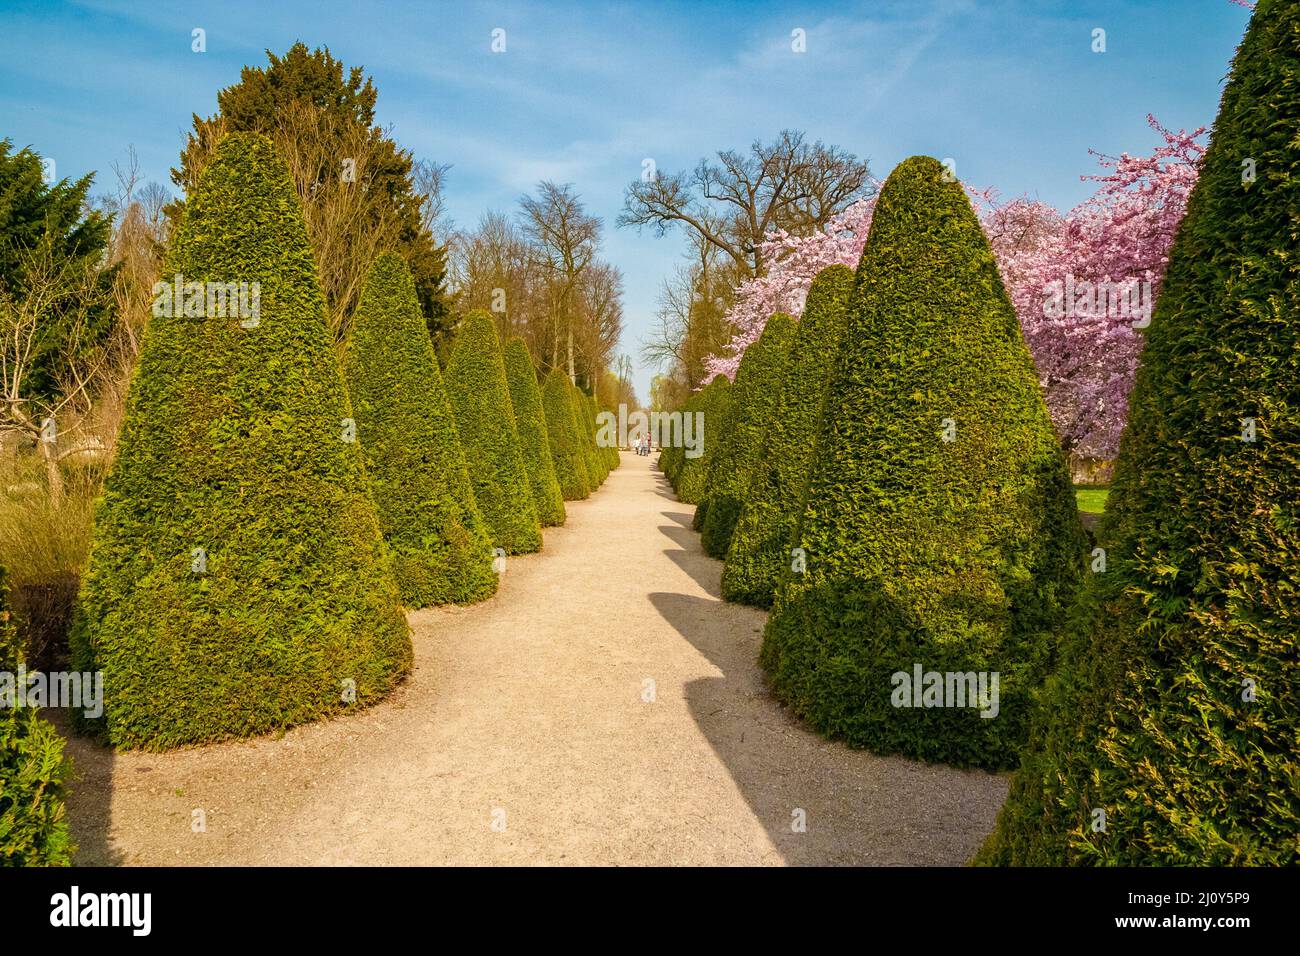 Gorgeous avenue of cone shaped trimmed arborvitae (Thuja species) shrubs in the Turkish Garden of the famous Schwetzingen palace gardens on a sunny... Stock Photo